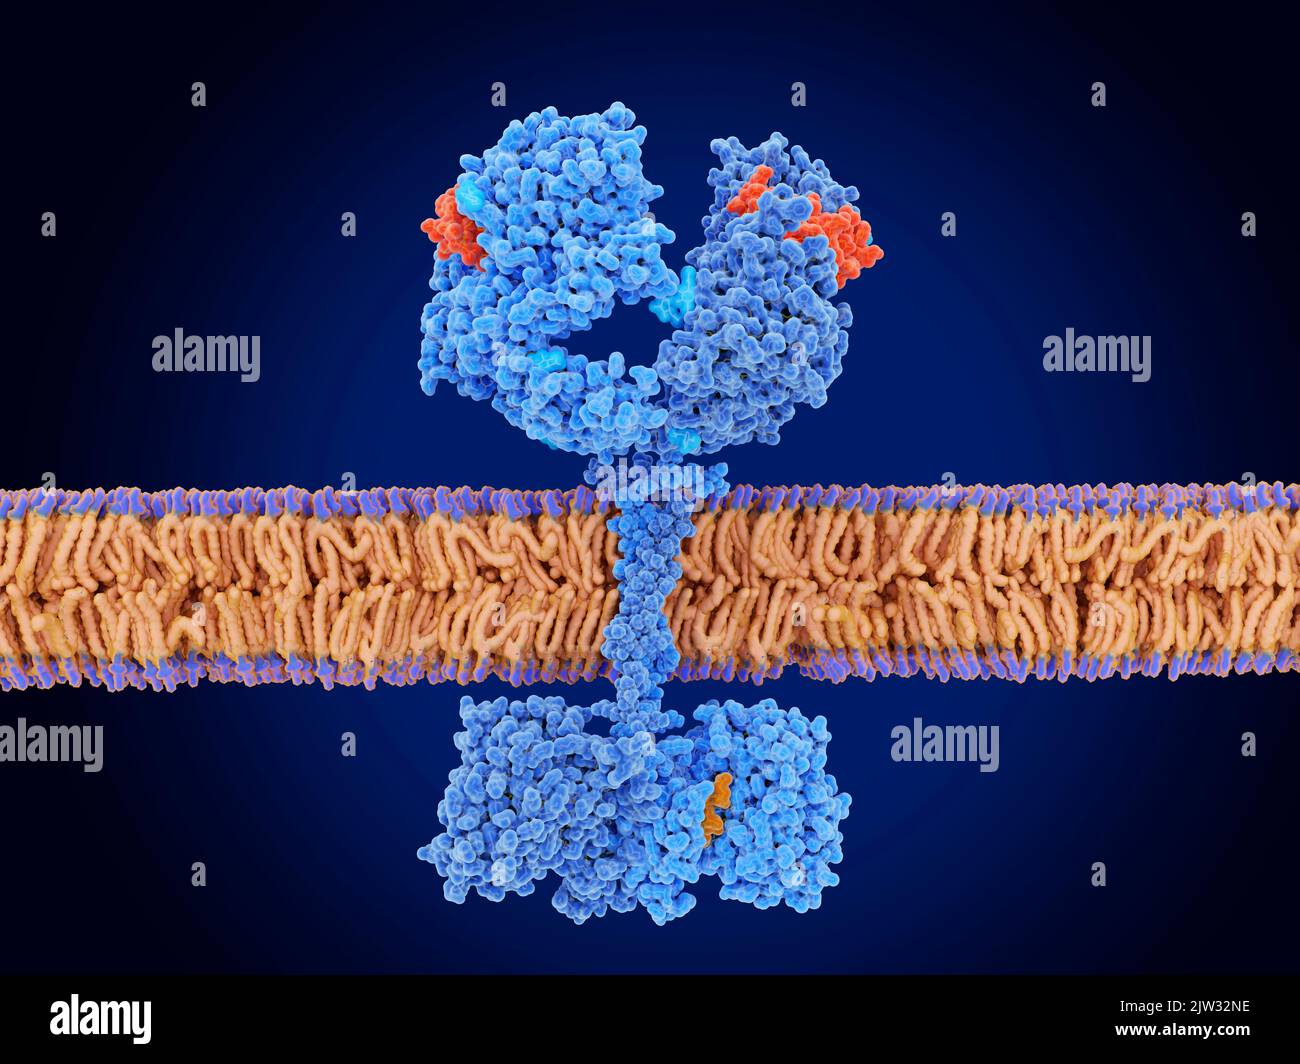 Illustration showing epidermal growth factor (EGF, red) activating the EGF receptor by binding to it. EGF is a protein that plays an important role in the regulation of cell growth proliferation and differentiation. The activated receptor promotes migration, adhesion and proliferation of cells. Stock Photo